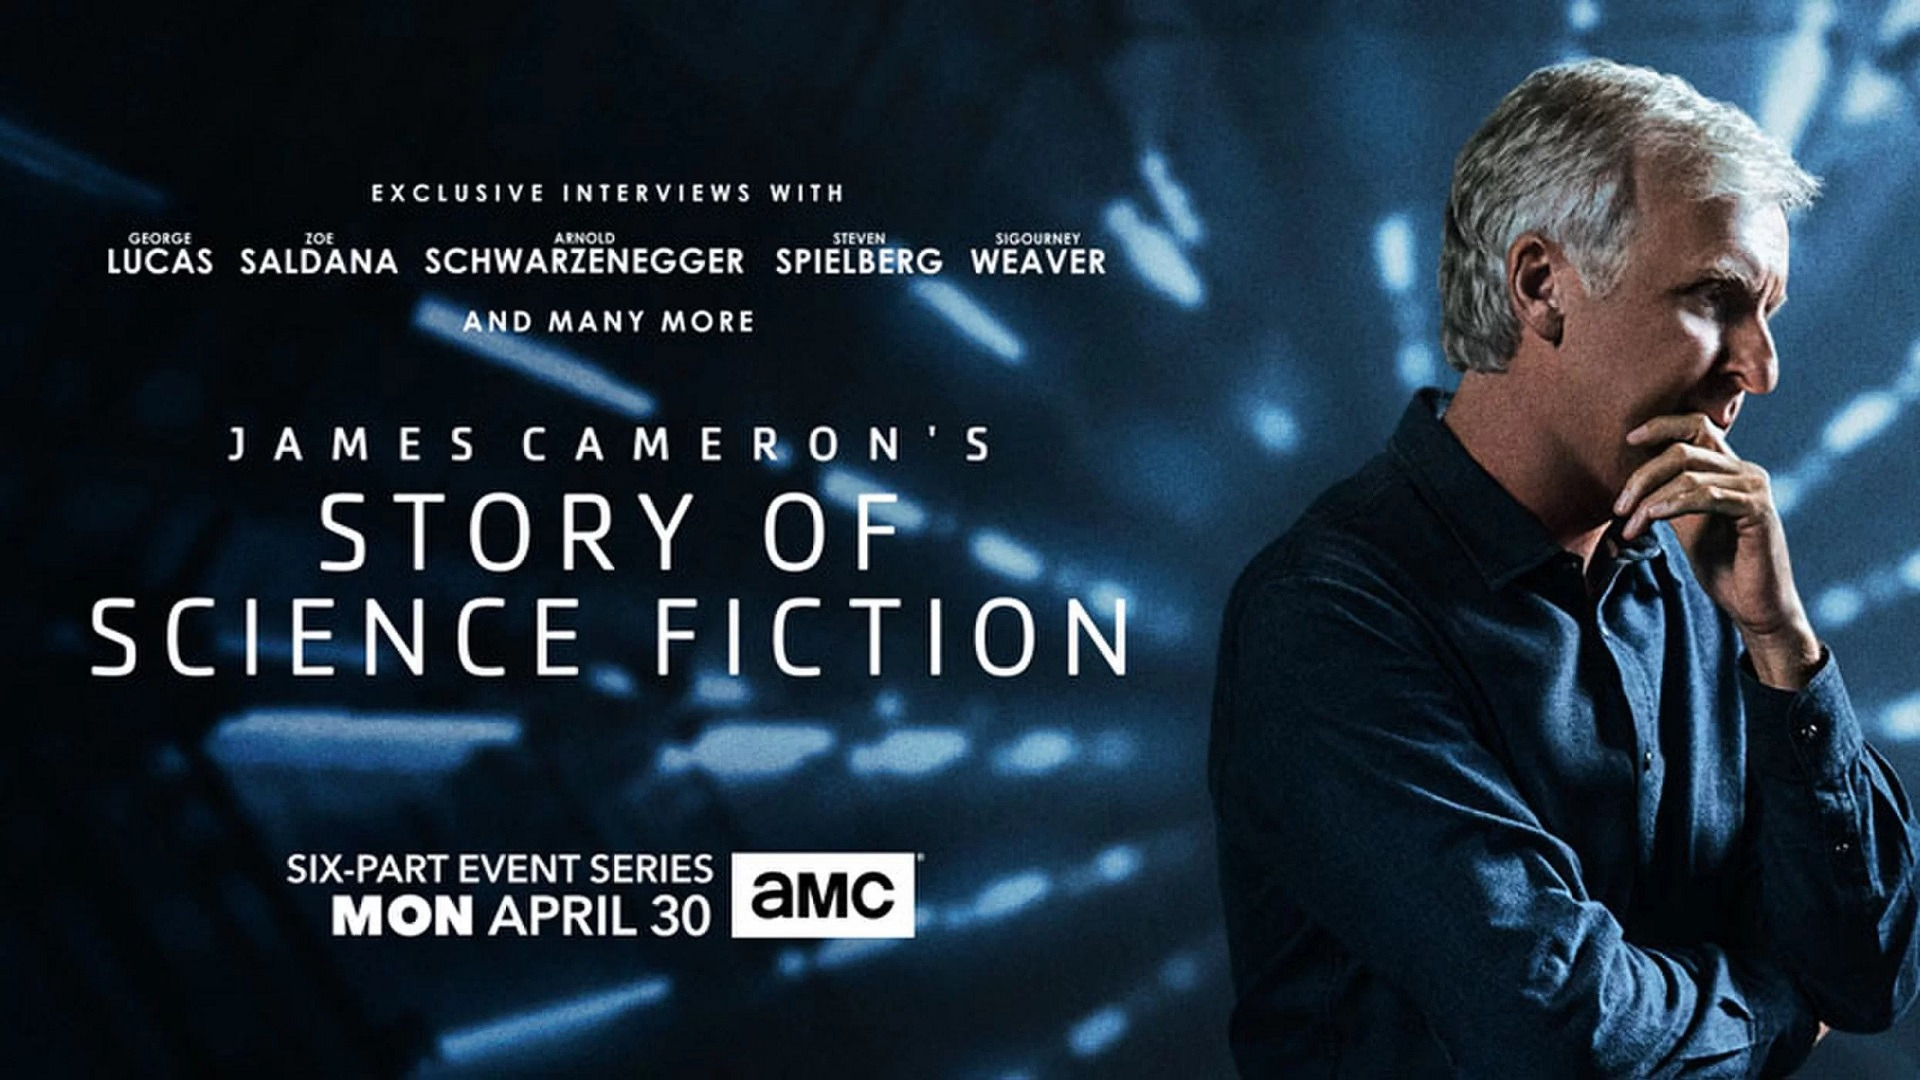 Show James Cameron's Story of Science Fiction